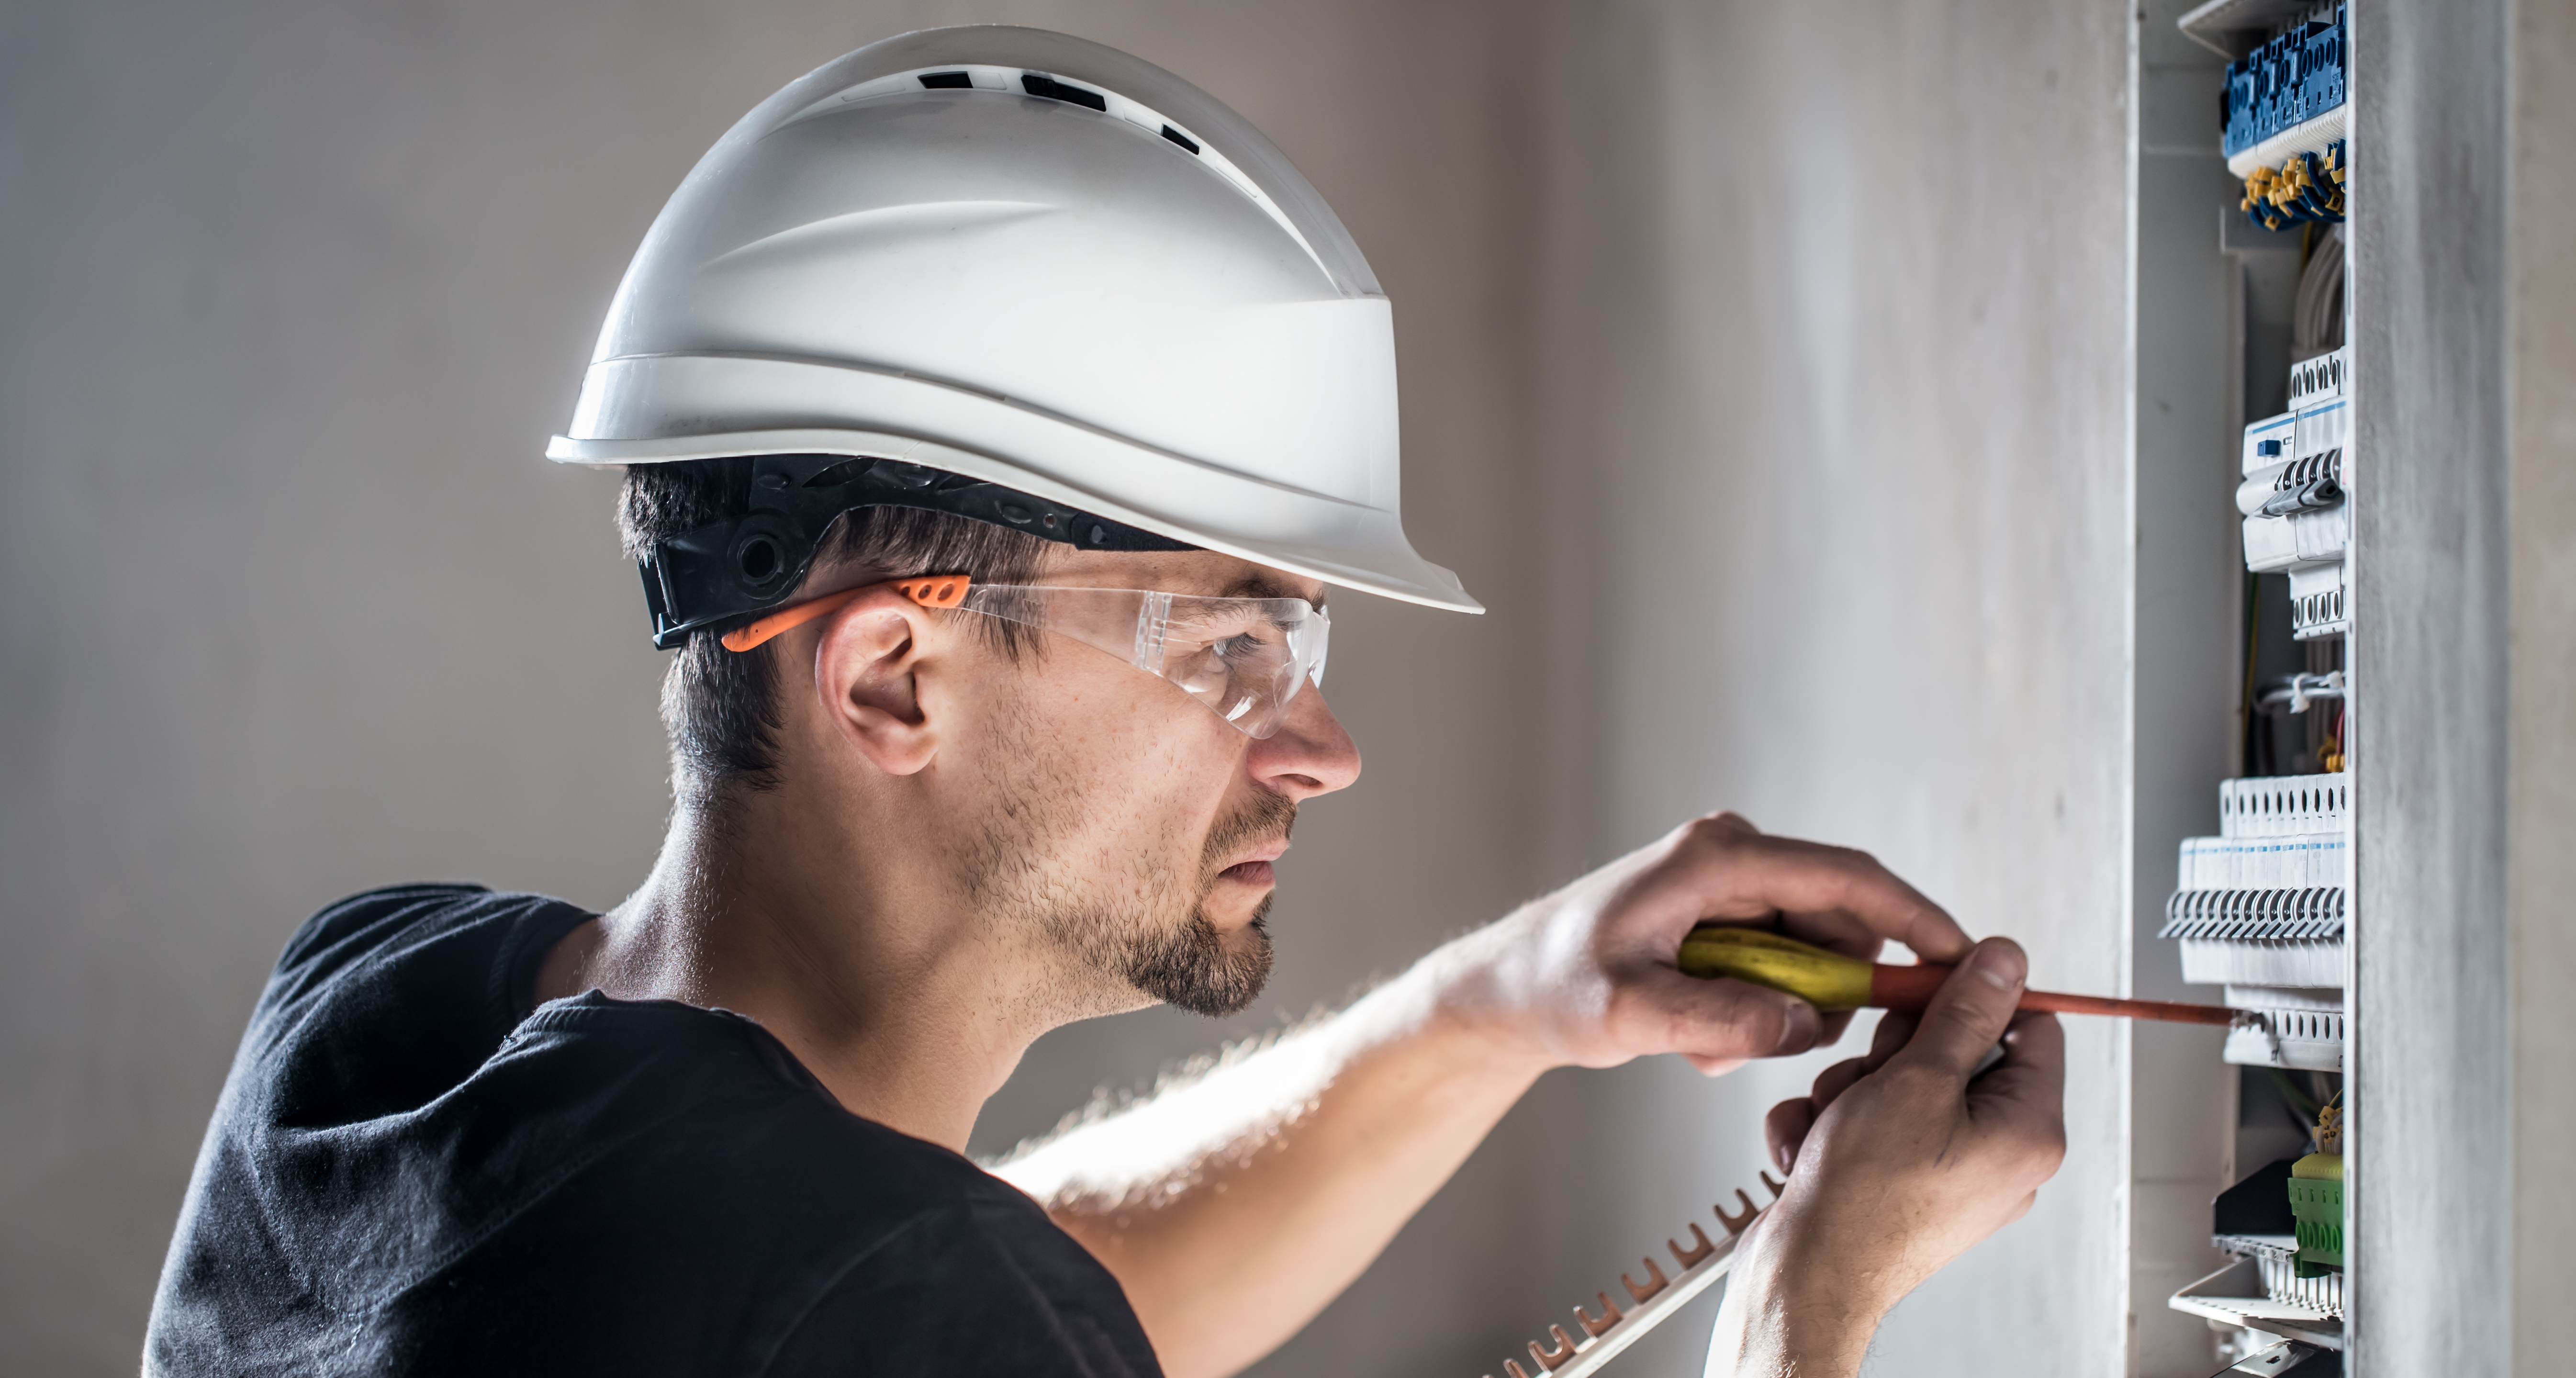 What Different Electrician Qualifications are there in the UK?